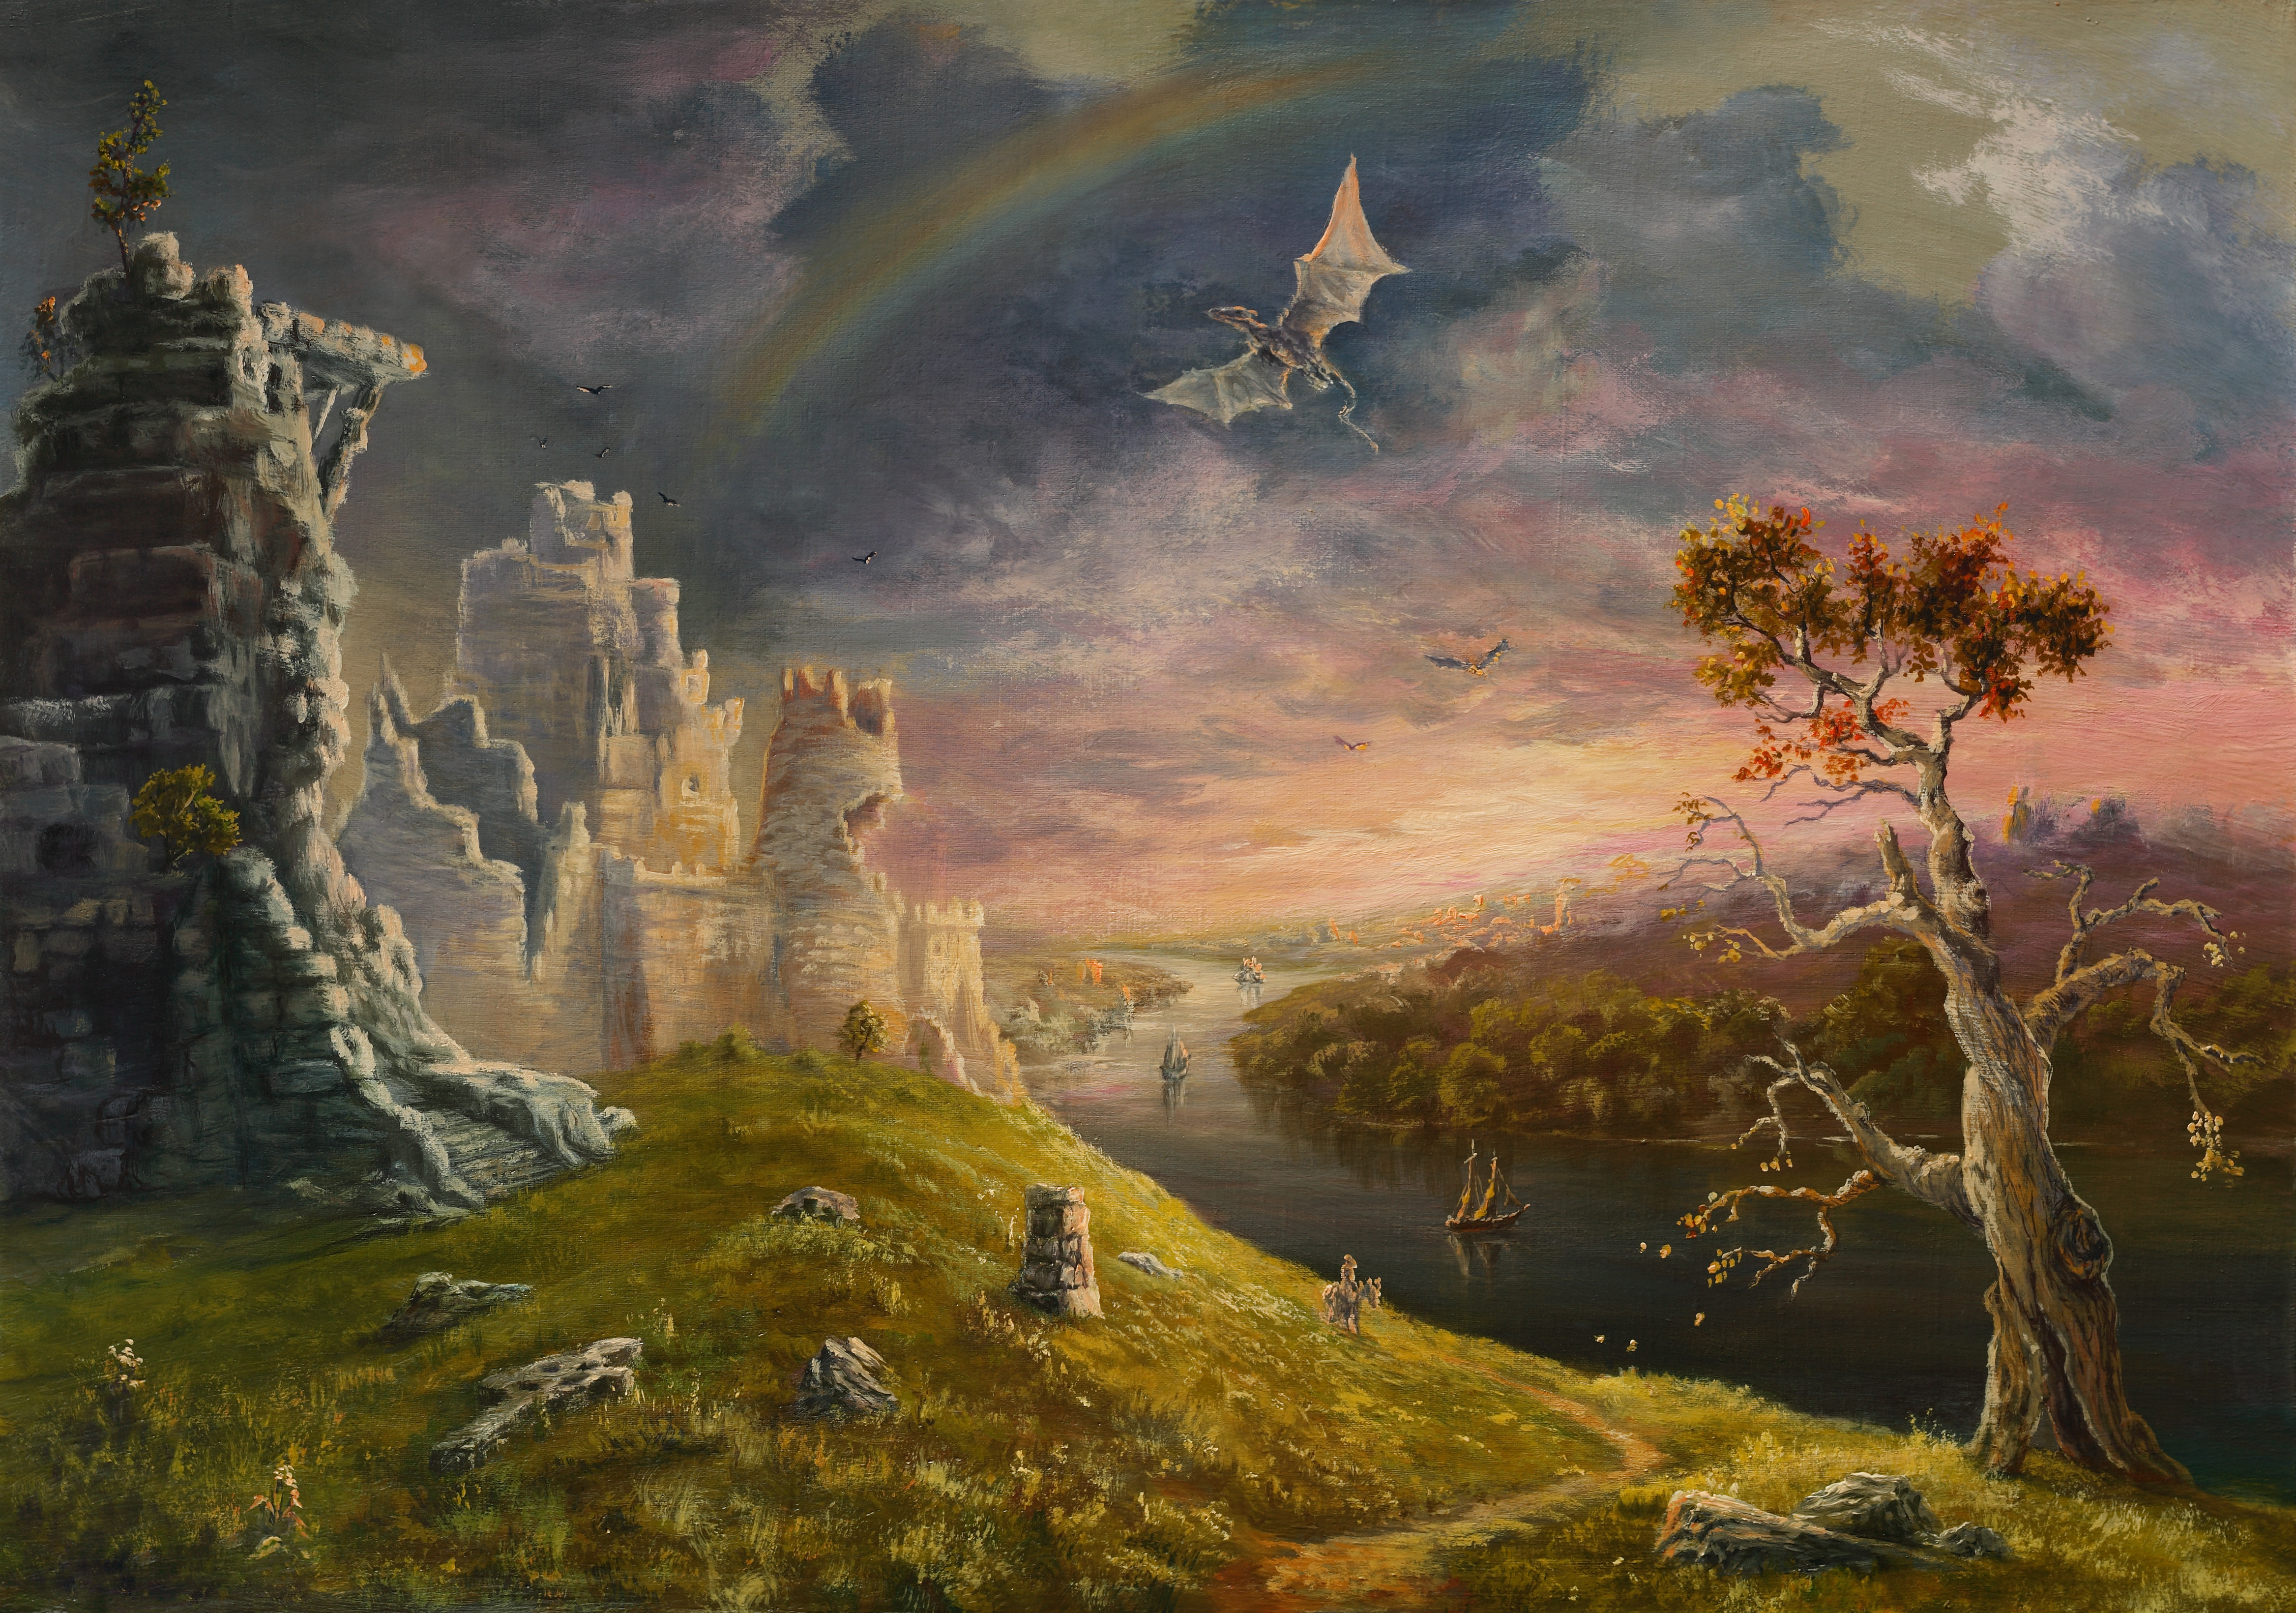 A dragon soars over a ruined castle surrounded by trees, with a murky rainbow in the sky.